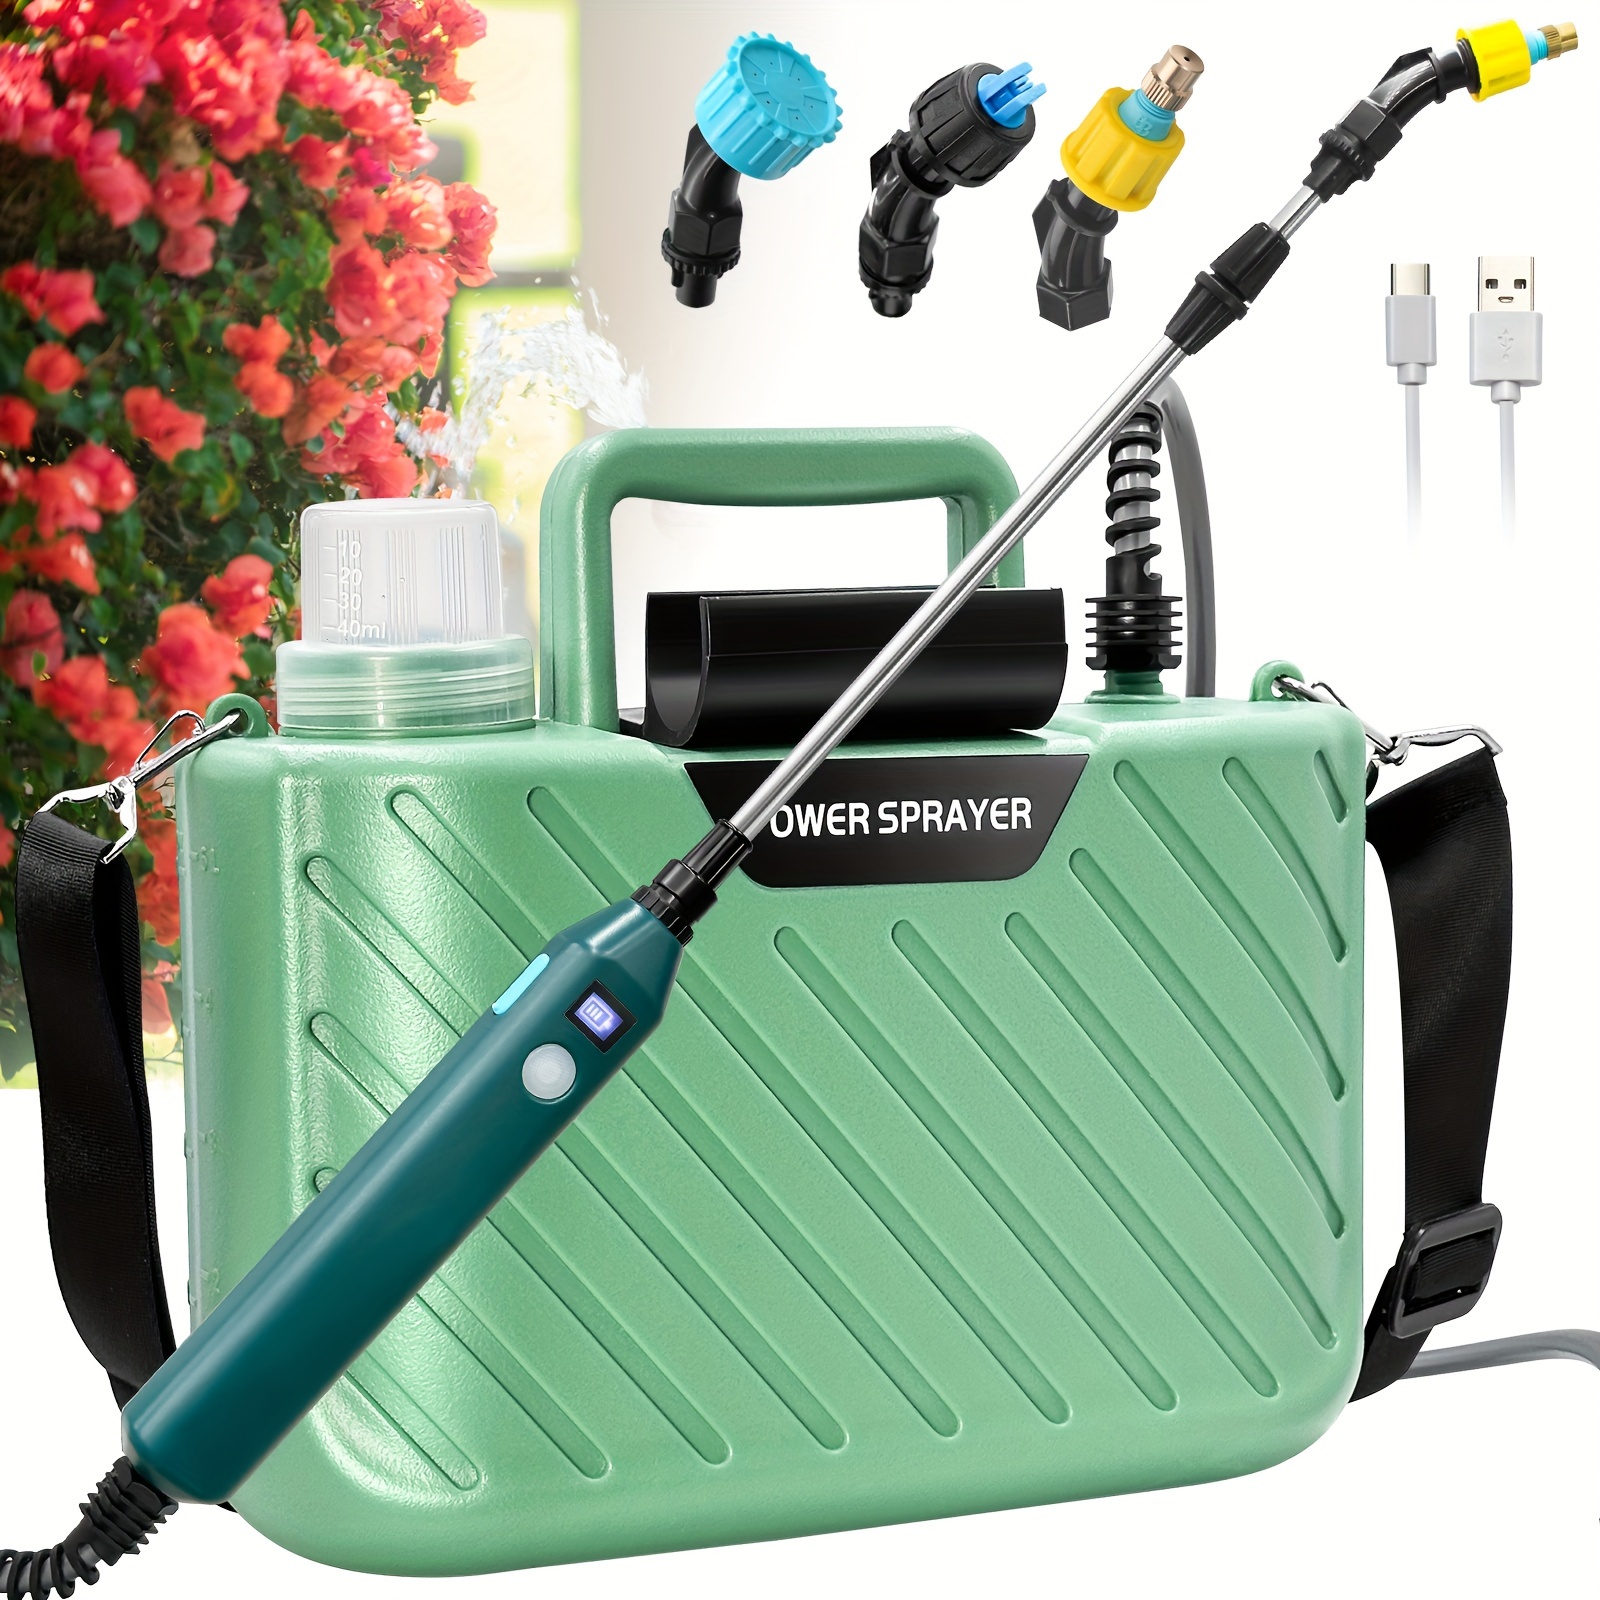 

New 1.35 Gallon Electric Garden Sprayer With Battery Indicator, 23.6" Telescopic Wand, 3 Mist Nozzles, Shoulder Type Water Sprayer For , Yard, Lawn And Garden